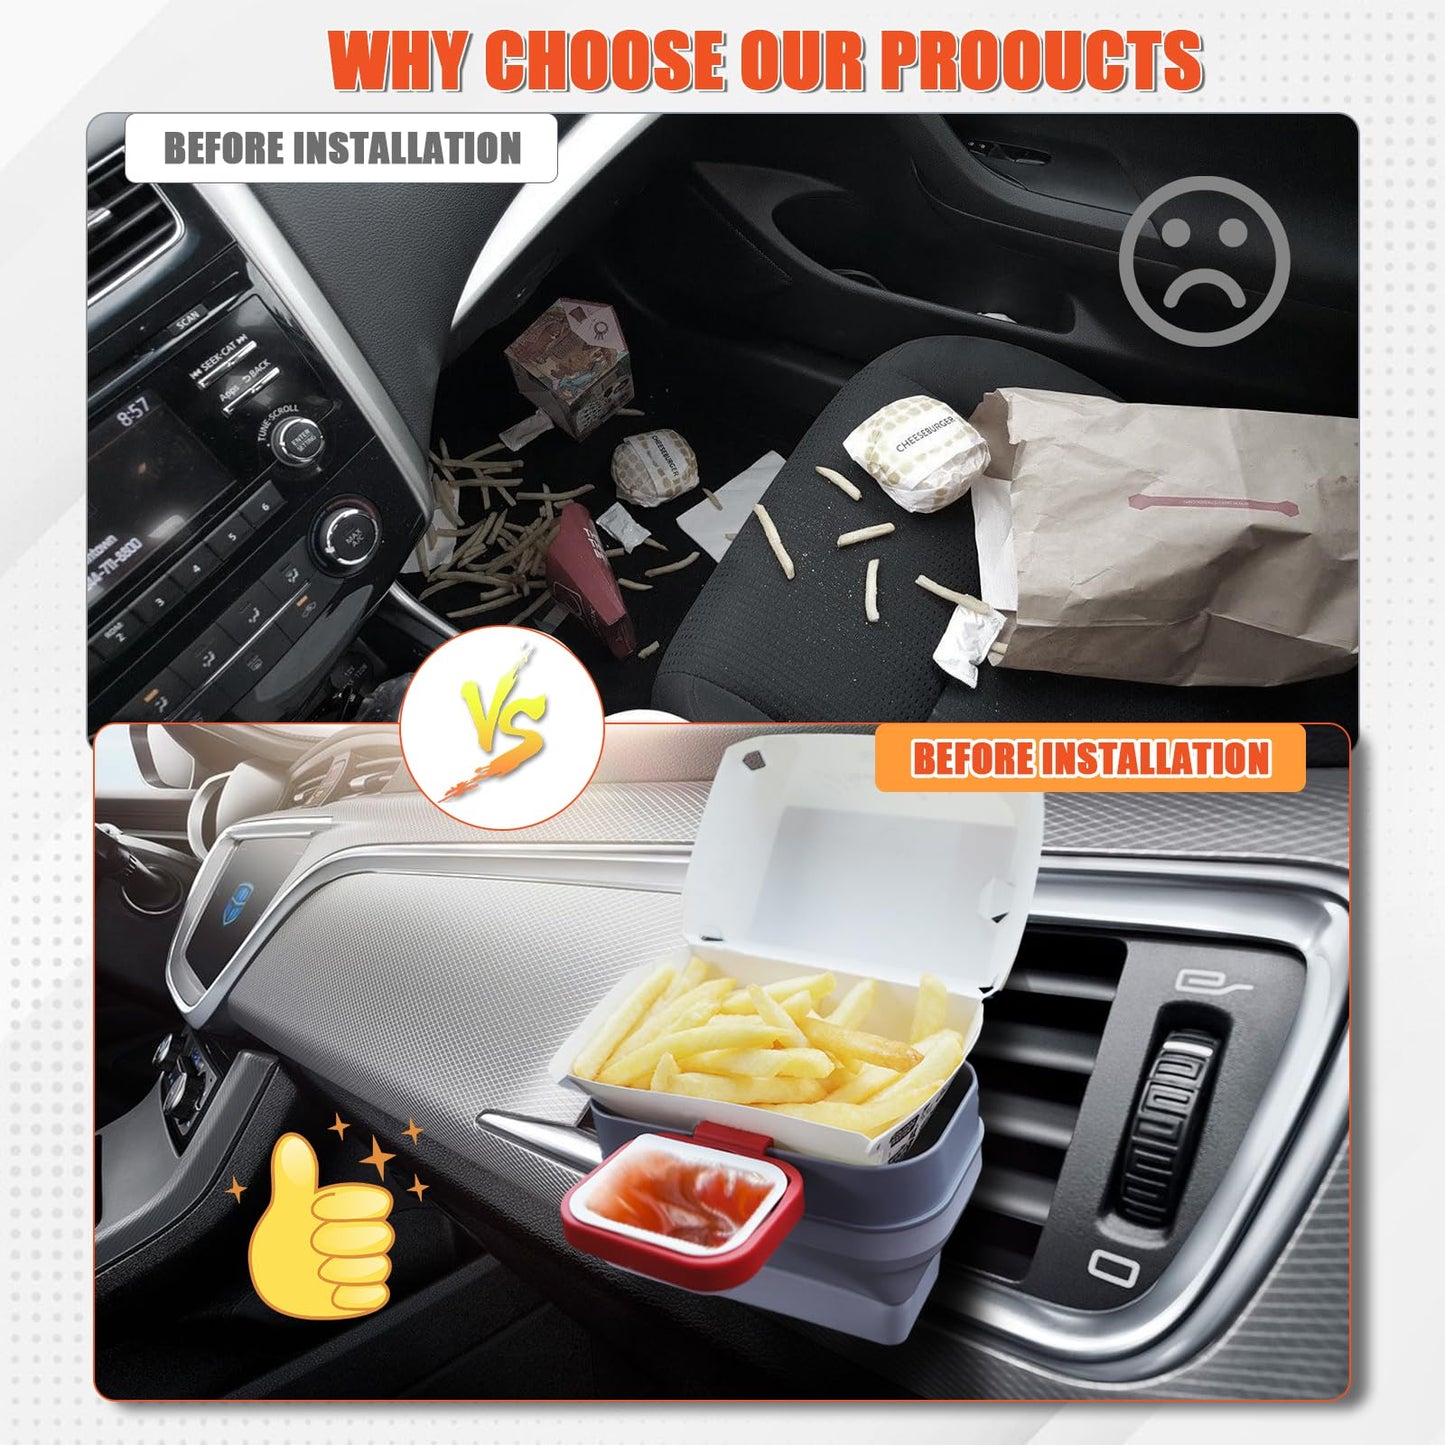 Car Vent Sauce Holder with Dip Clip for Fries & Sauce